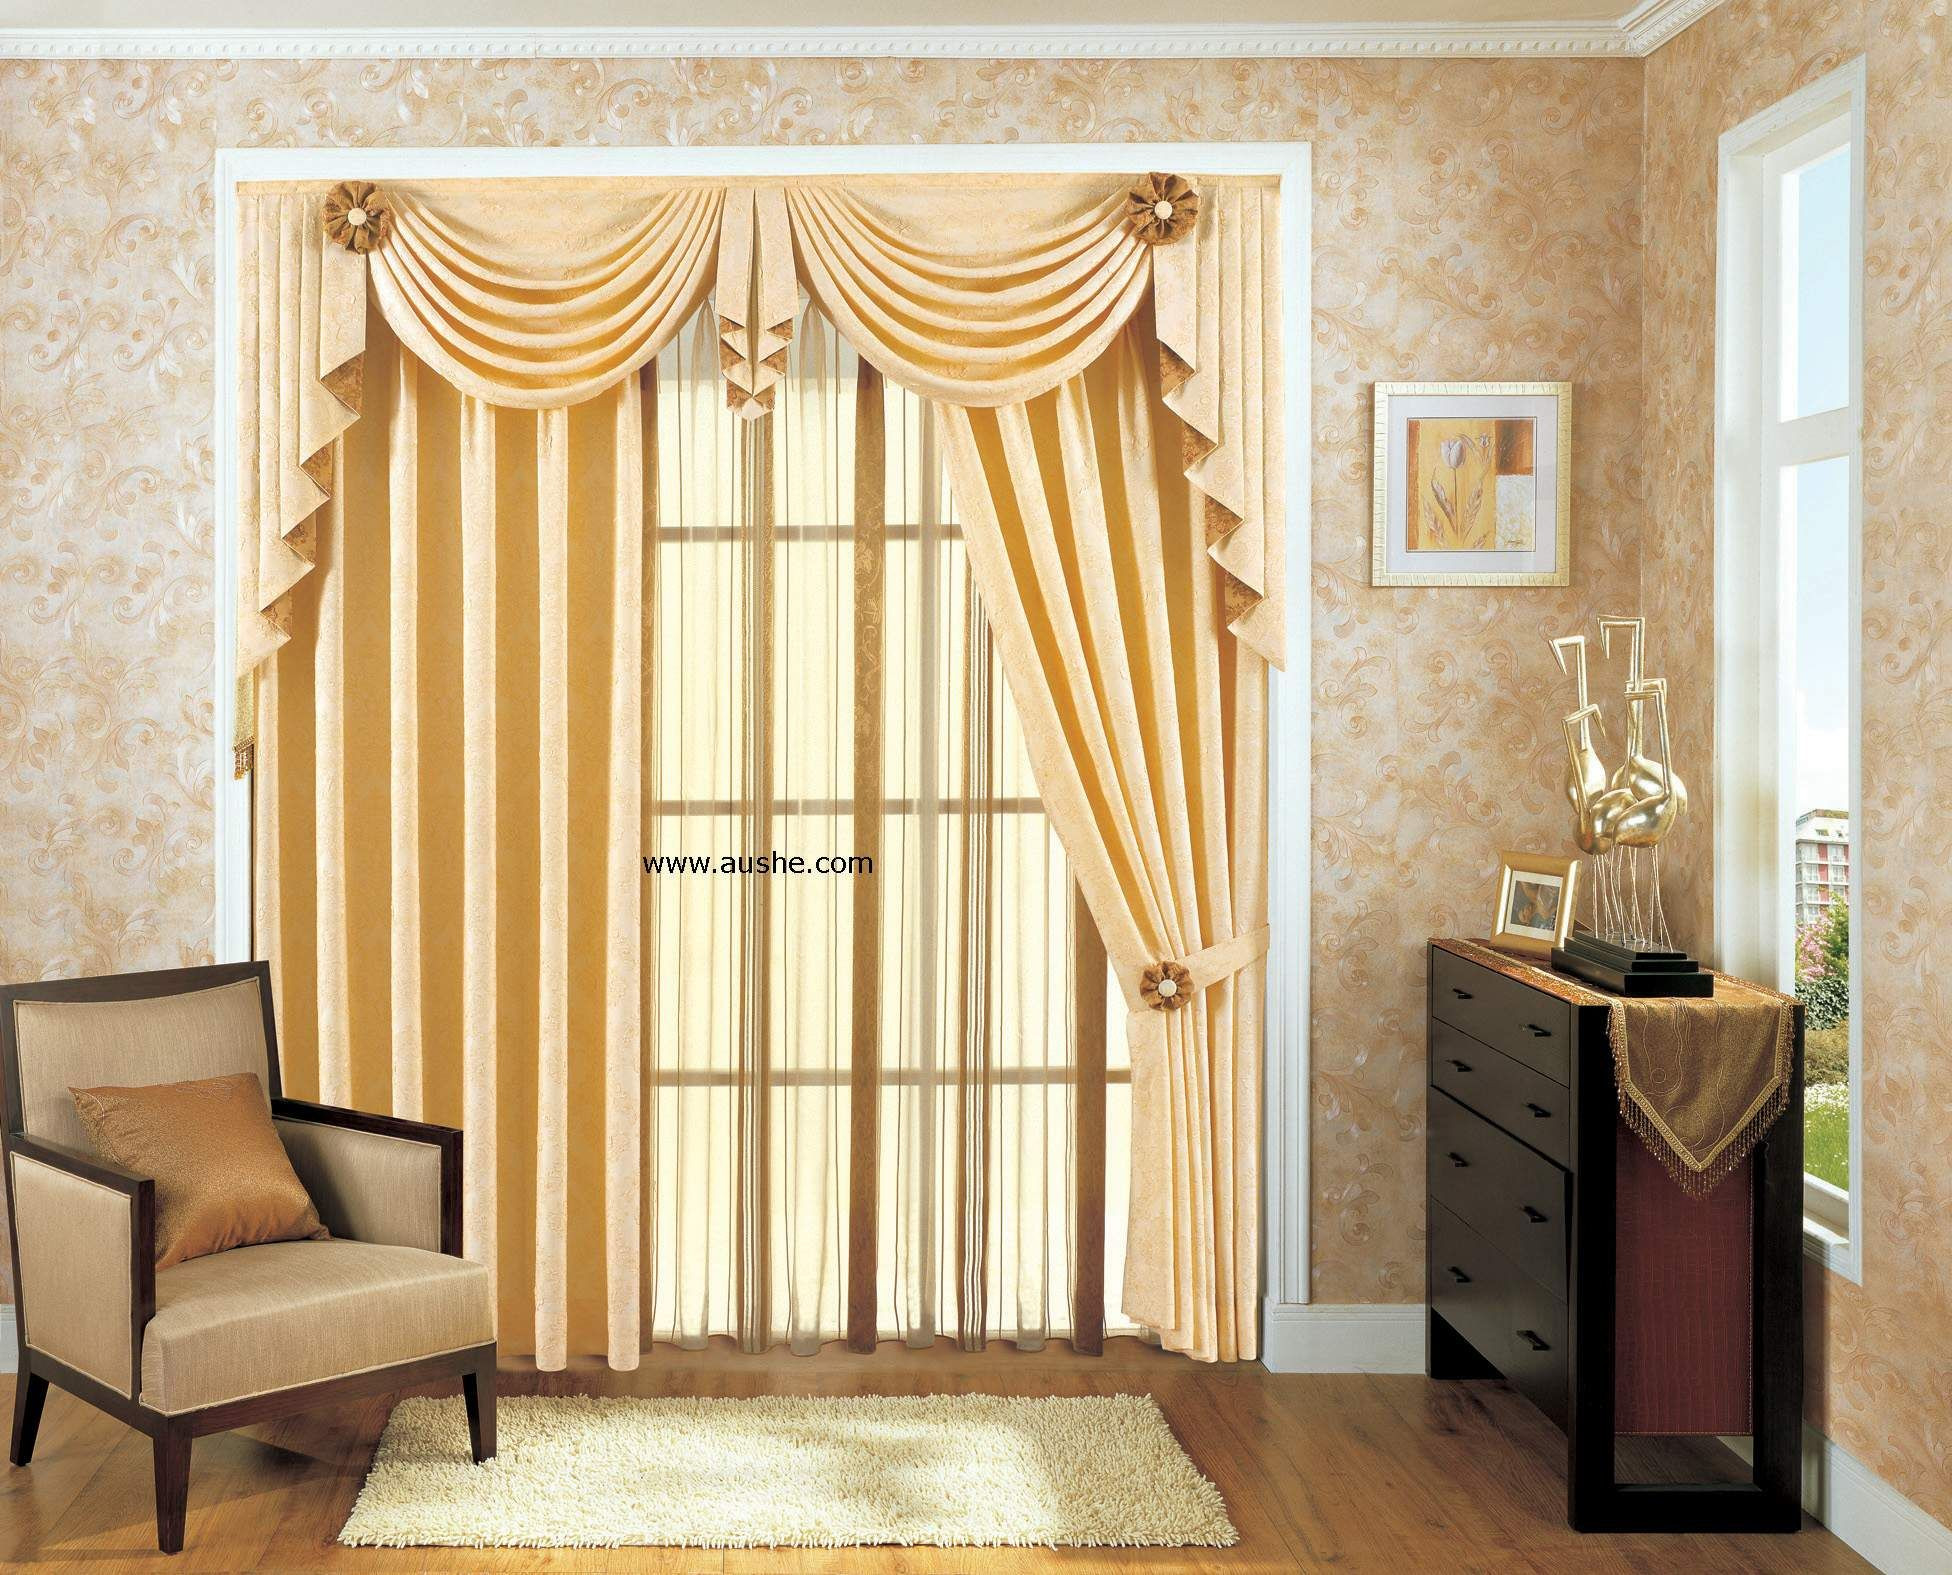 Elegant Living Room Curtains
 Matching Wallpaper And Curtains For Living Room Homebase